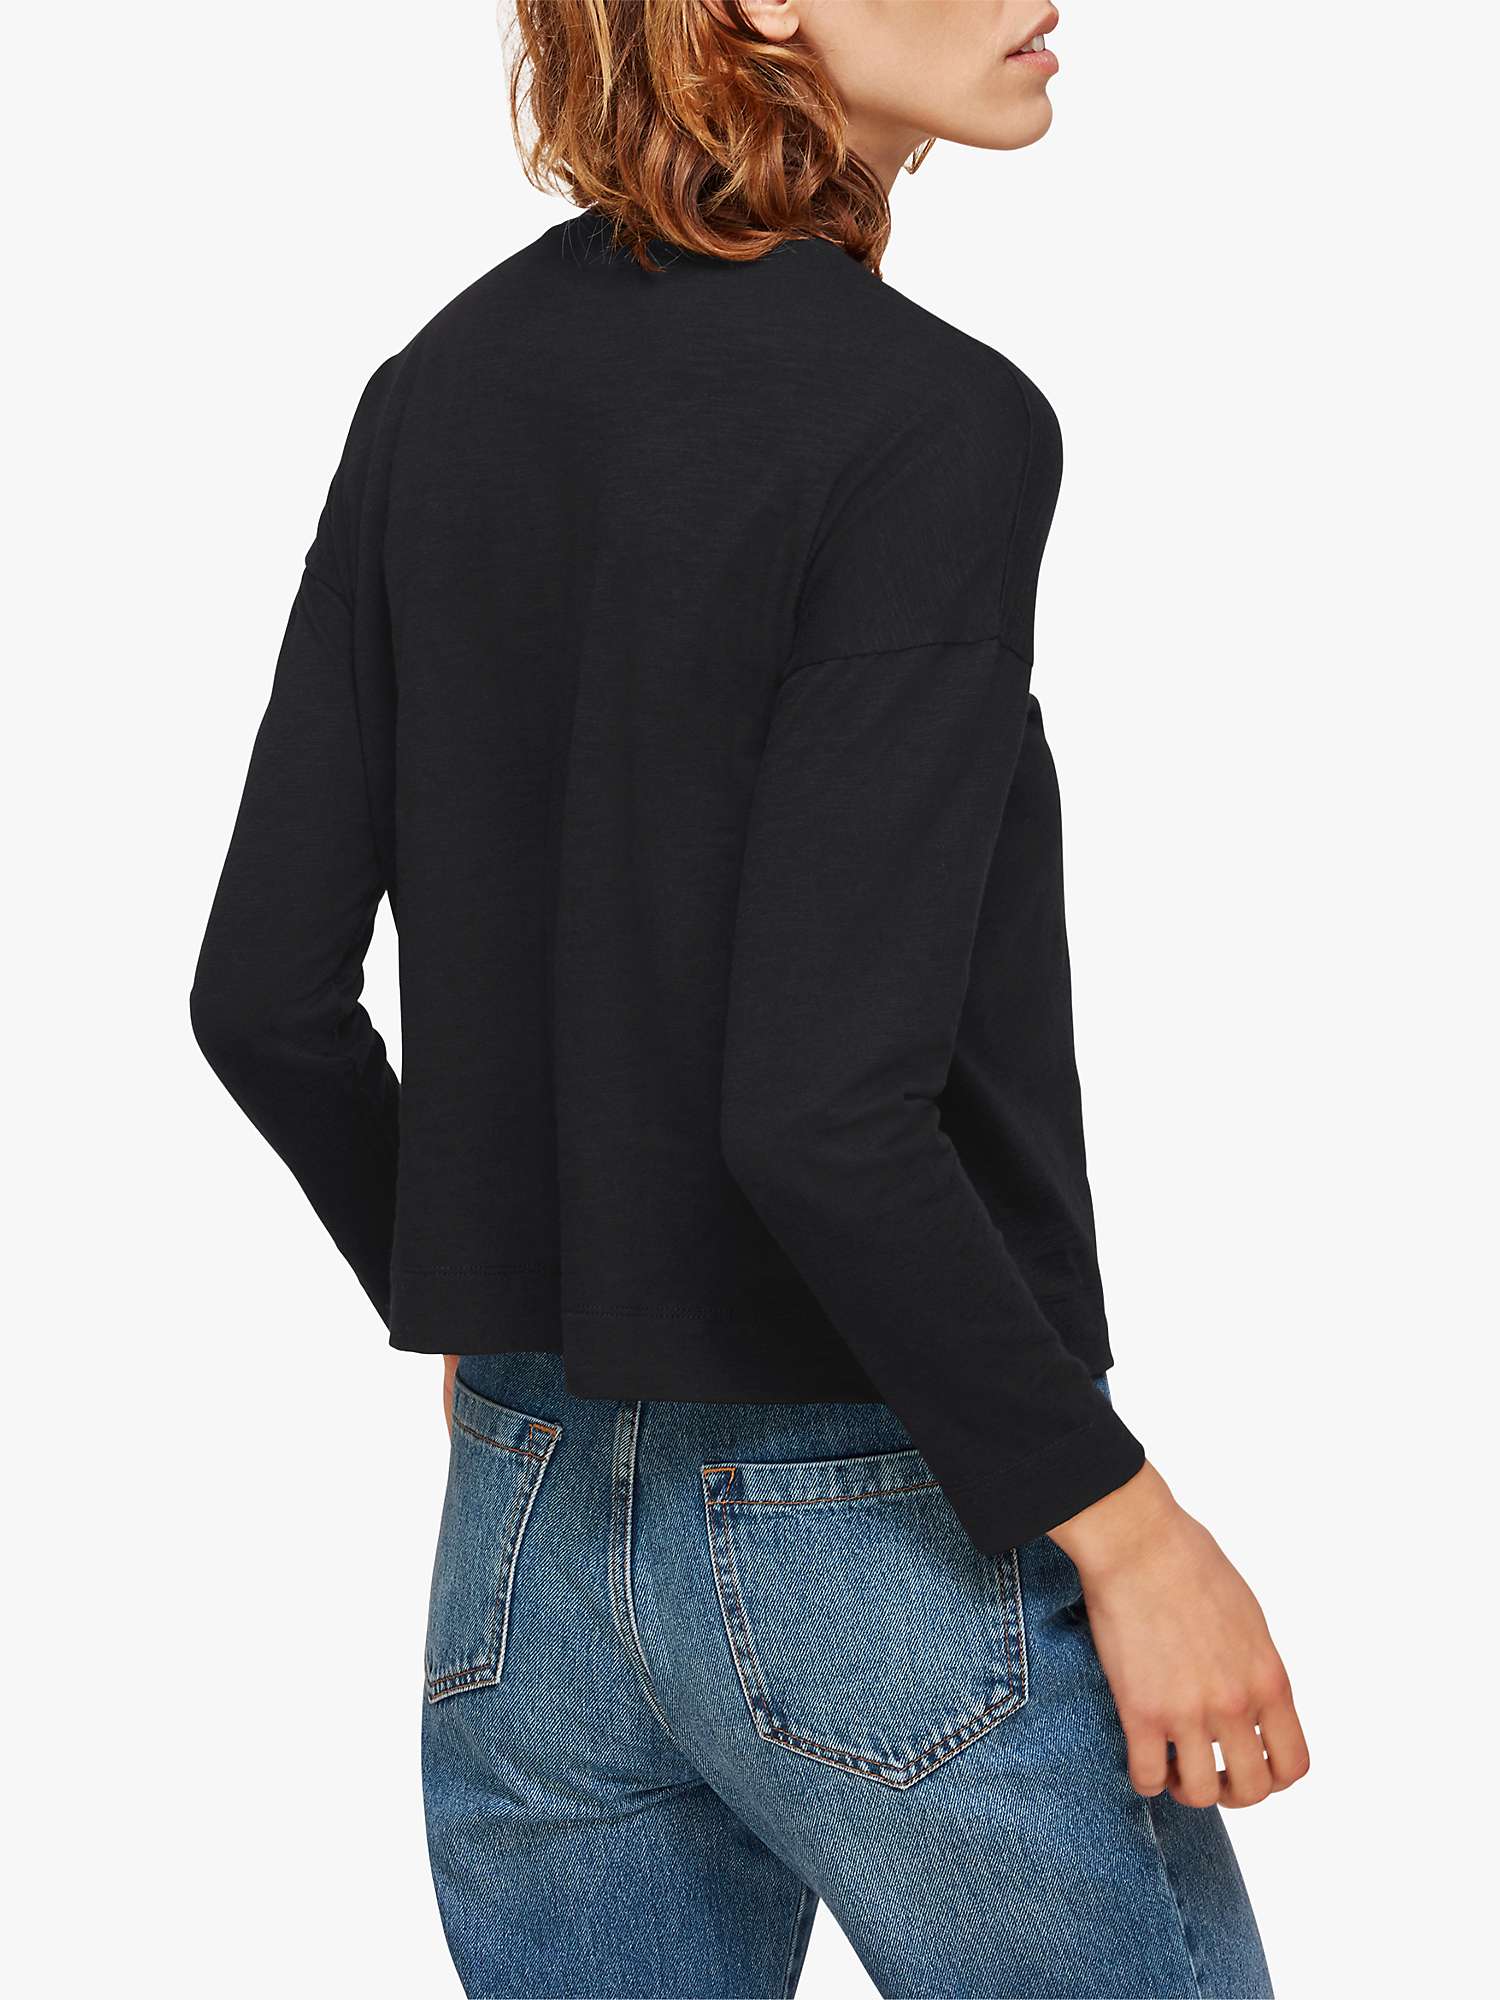 Buy Whistles High Neck Relaxed Fit Top Online at johnlewis.com